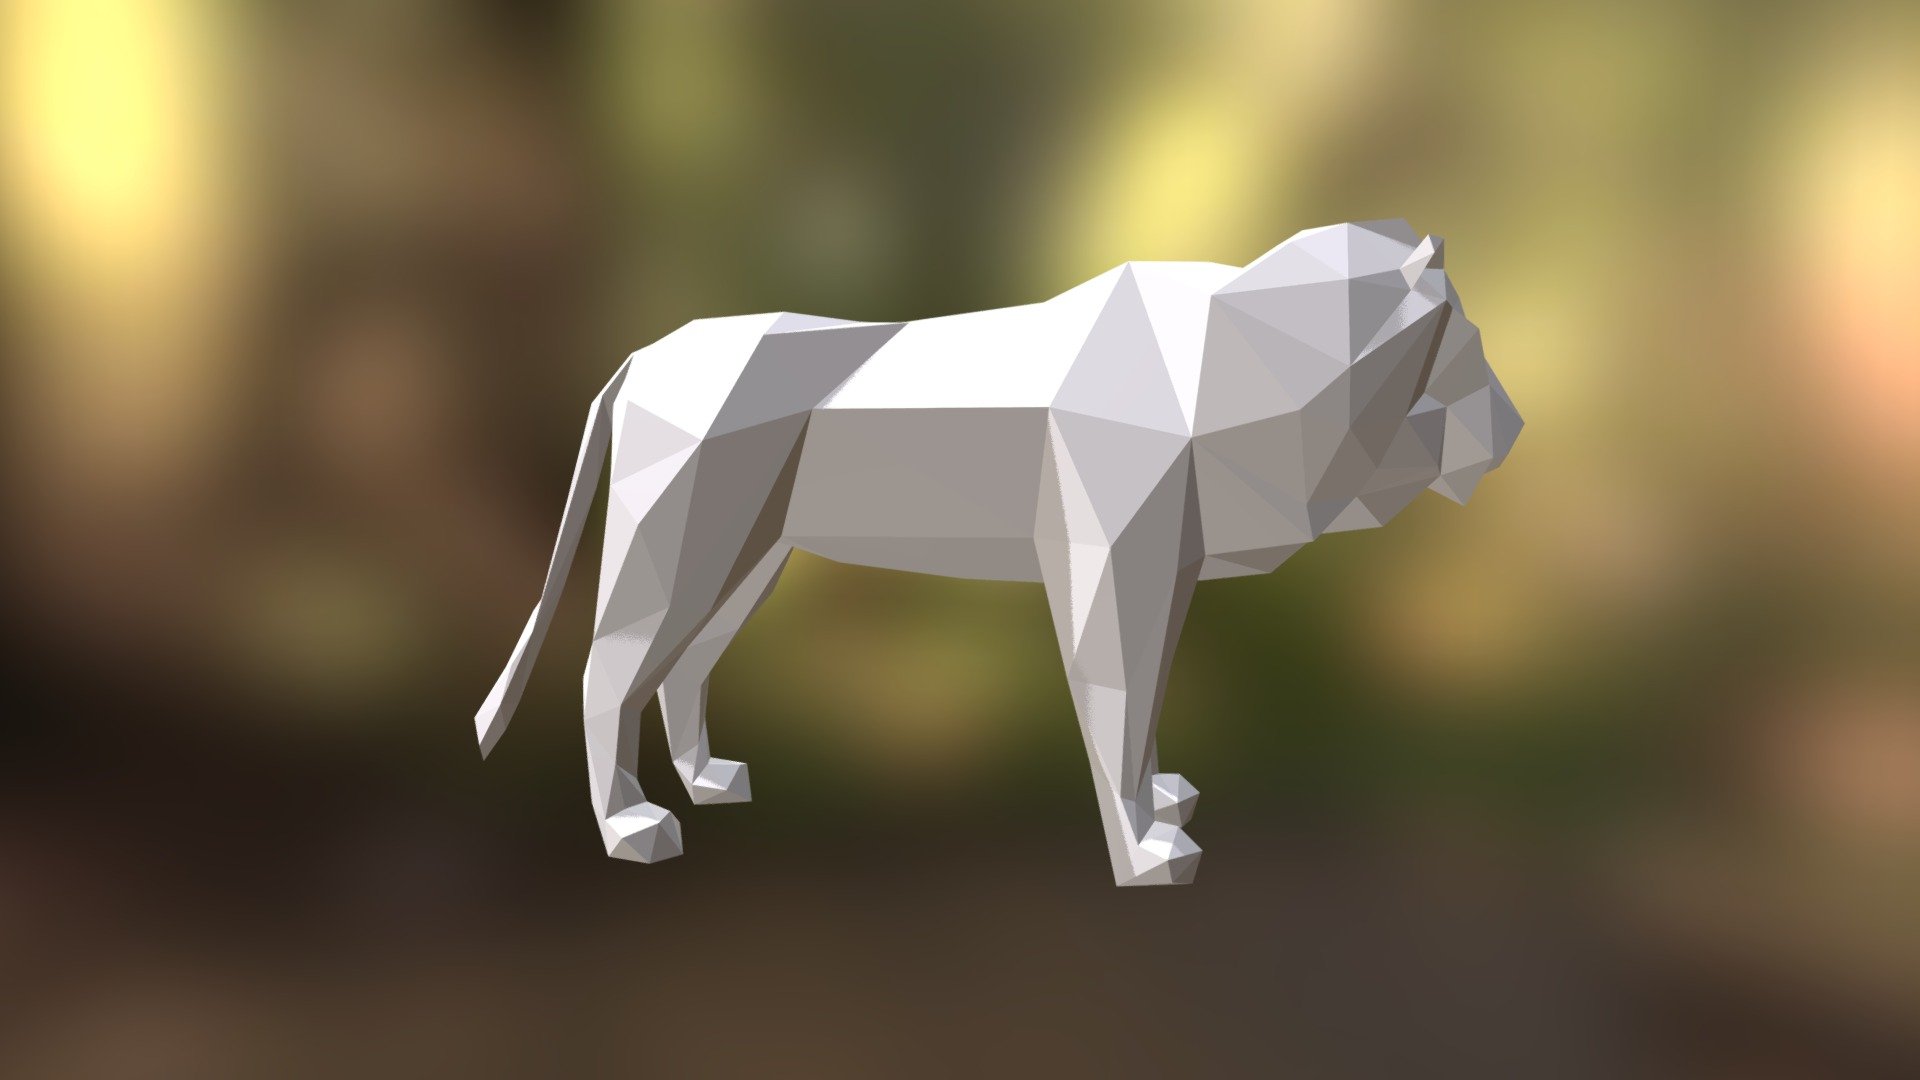 Low Poly 3D model for 3D printing. Lion Low Poly sculpture. You can find this model for 3D printing in my shop: -link removed- Reference model: http://www.cadnav.com - Lion low poly model for 3D printing - 3D model by Peolla3D 3d model